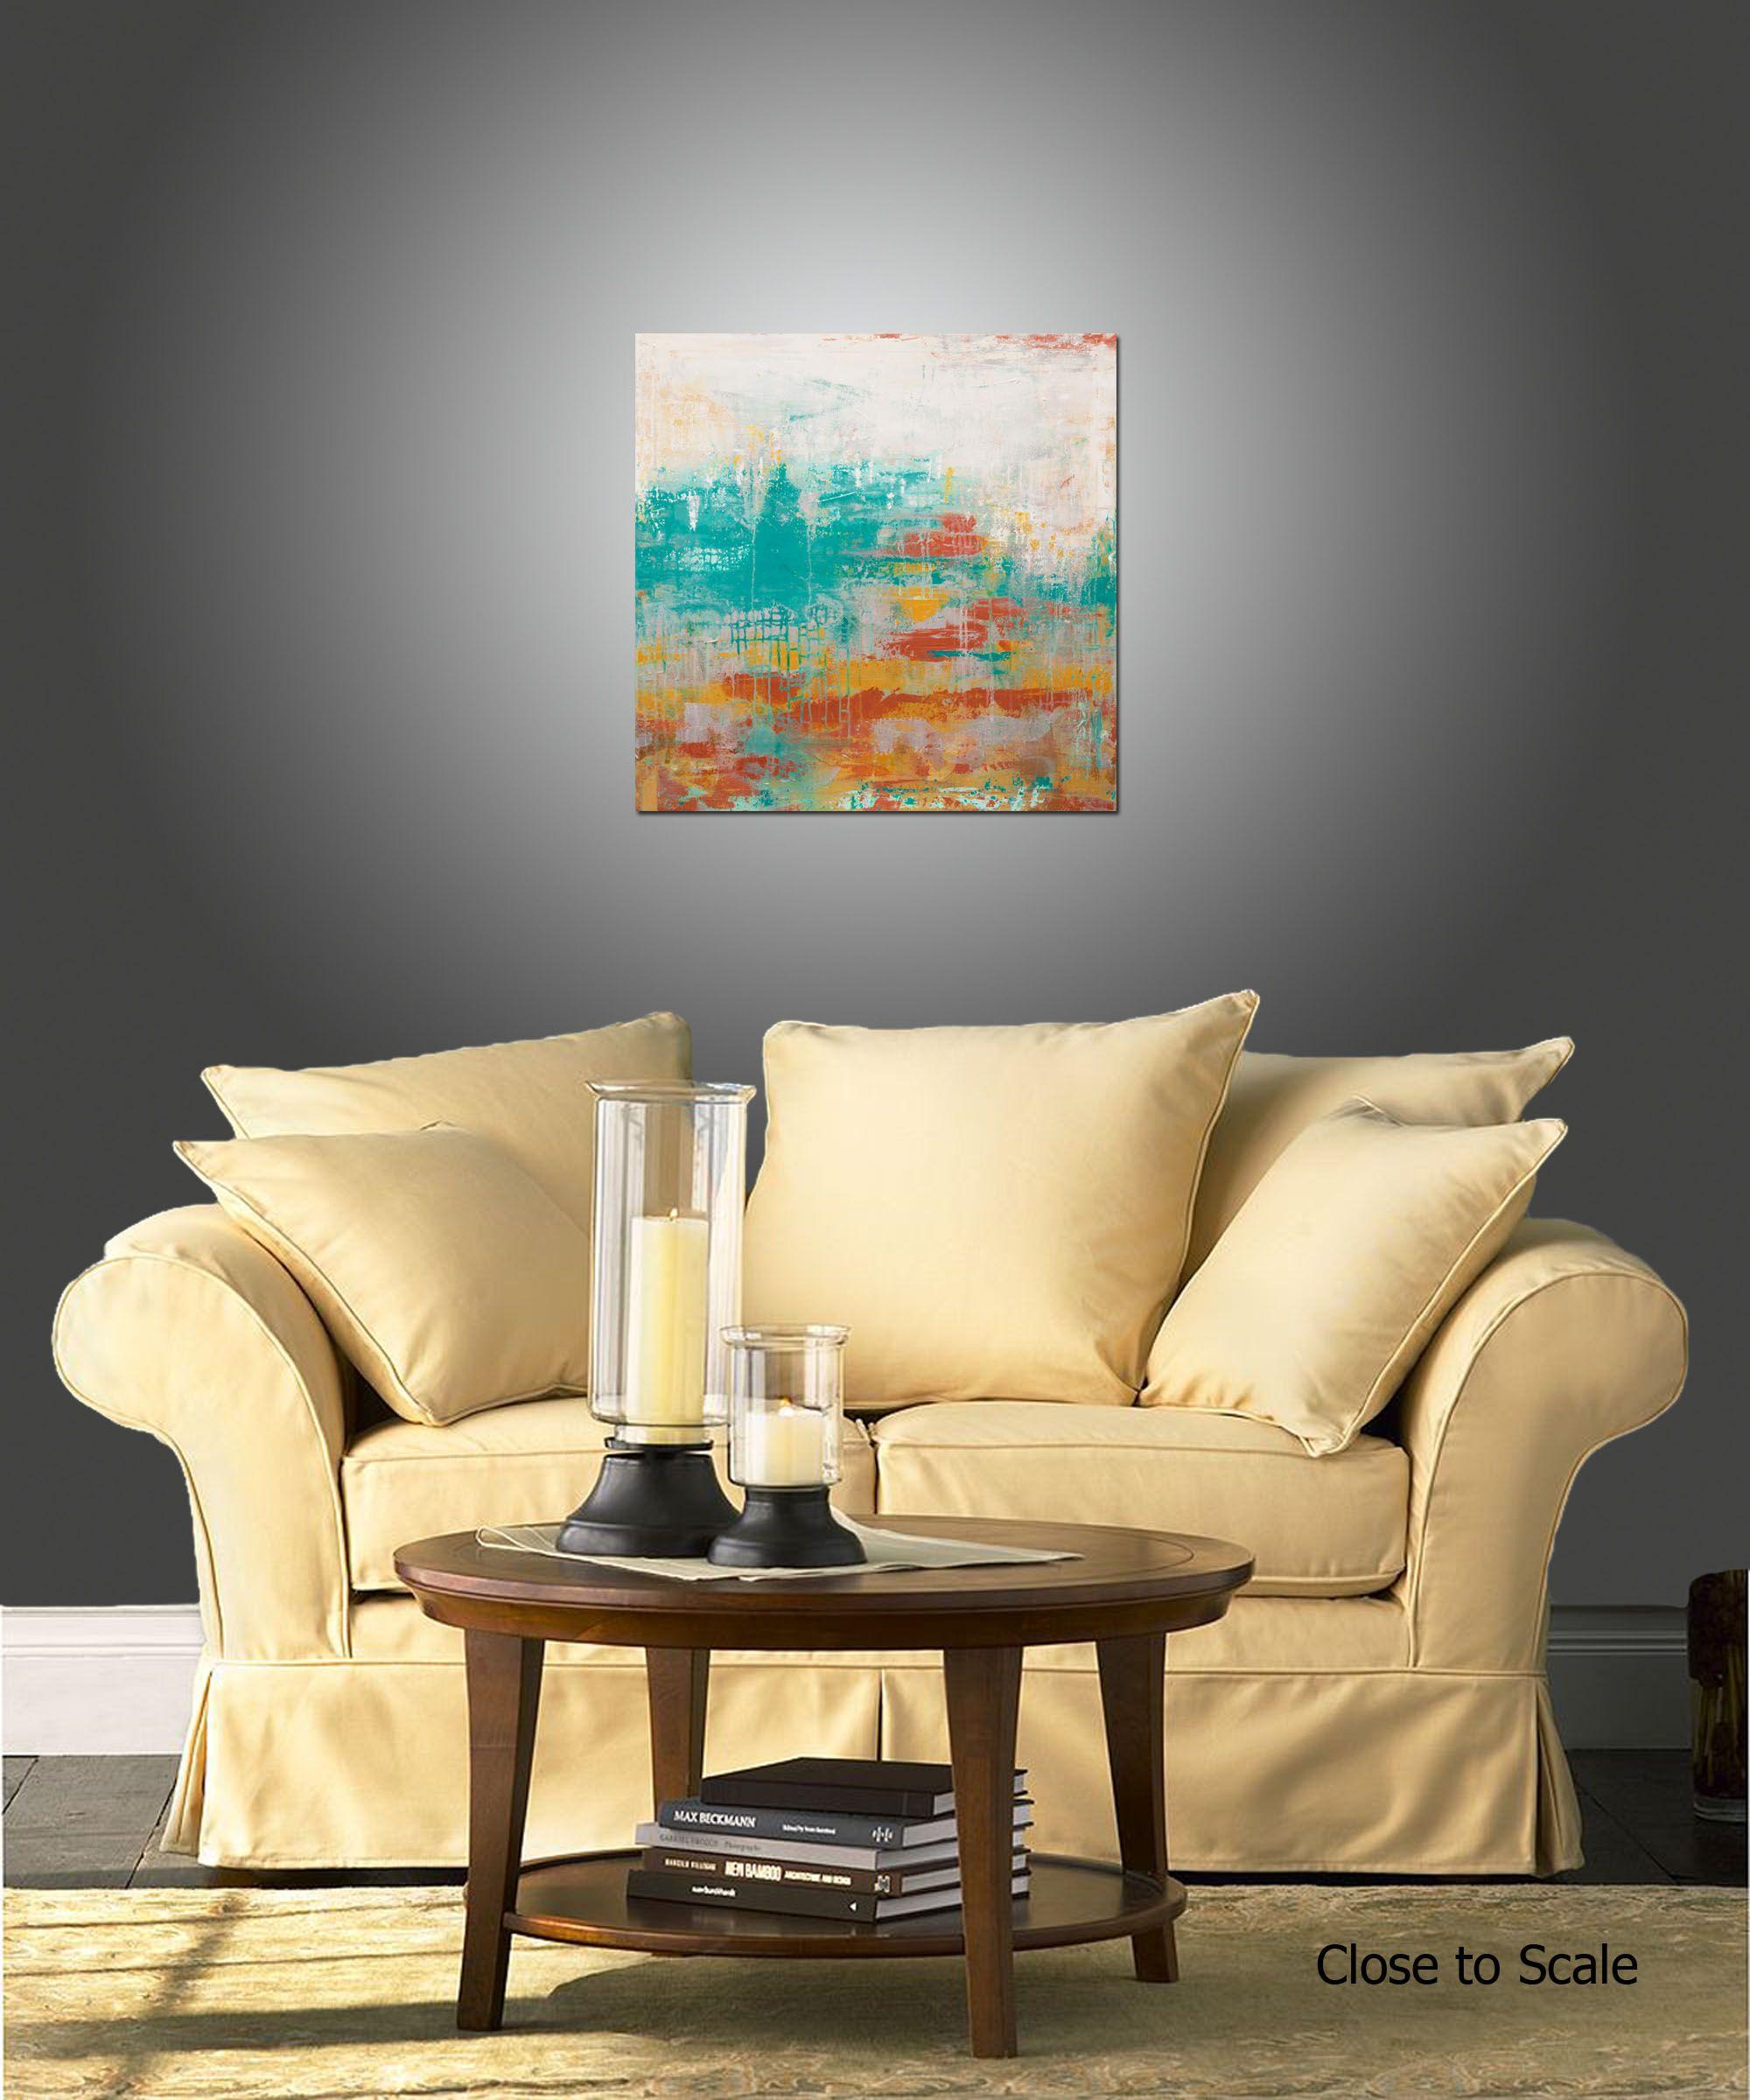 Into the Horizon is an original painting, created with acrylic paint on gallery-wrapped canvas. It has a width of 30 inches and a height of 30 inches with a depth of 1.5 inches (30x30x1.5). The painting continues onto the edges of the canvas,